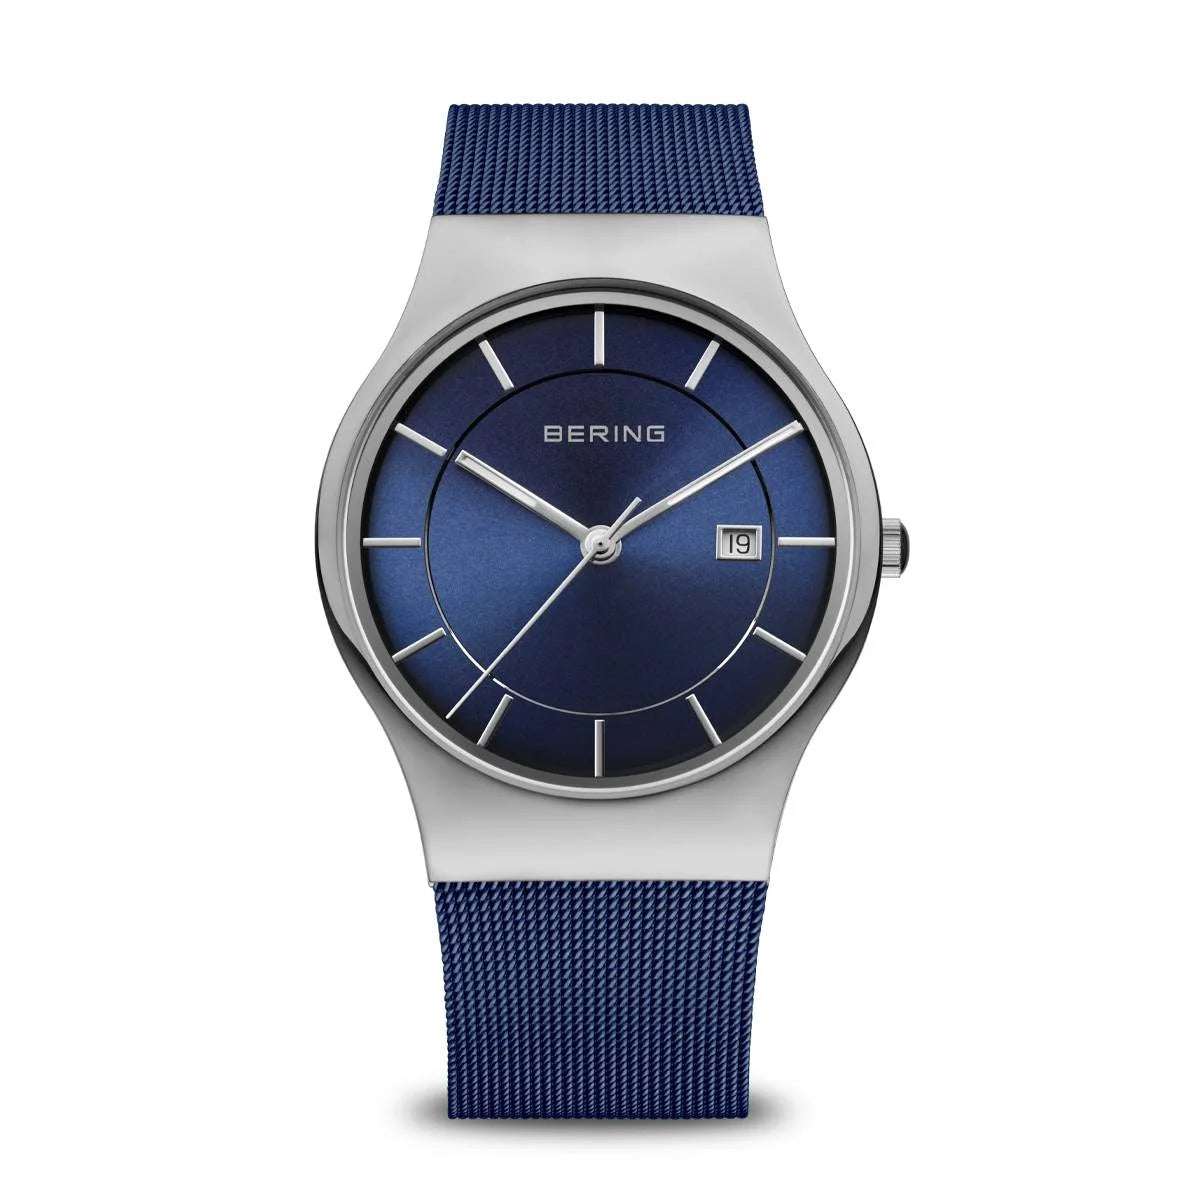 Bering mens watch with blue dial and strap and silver case - Carathea jewellers